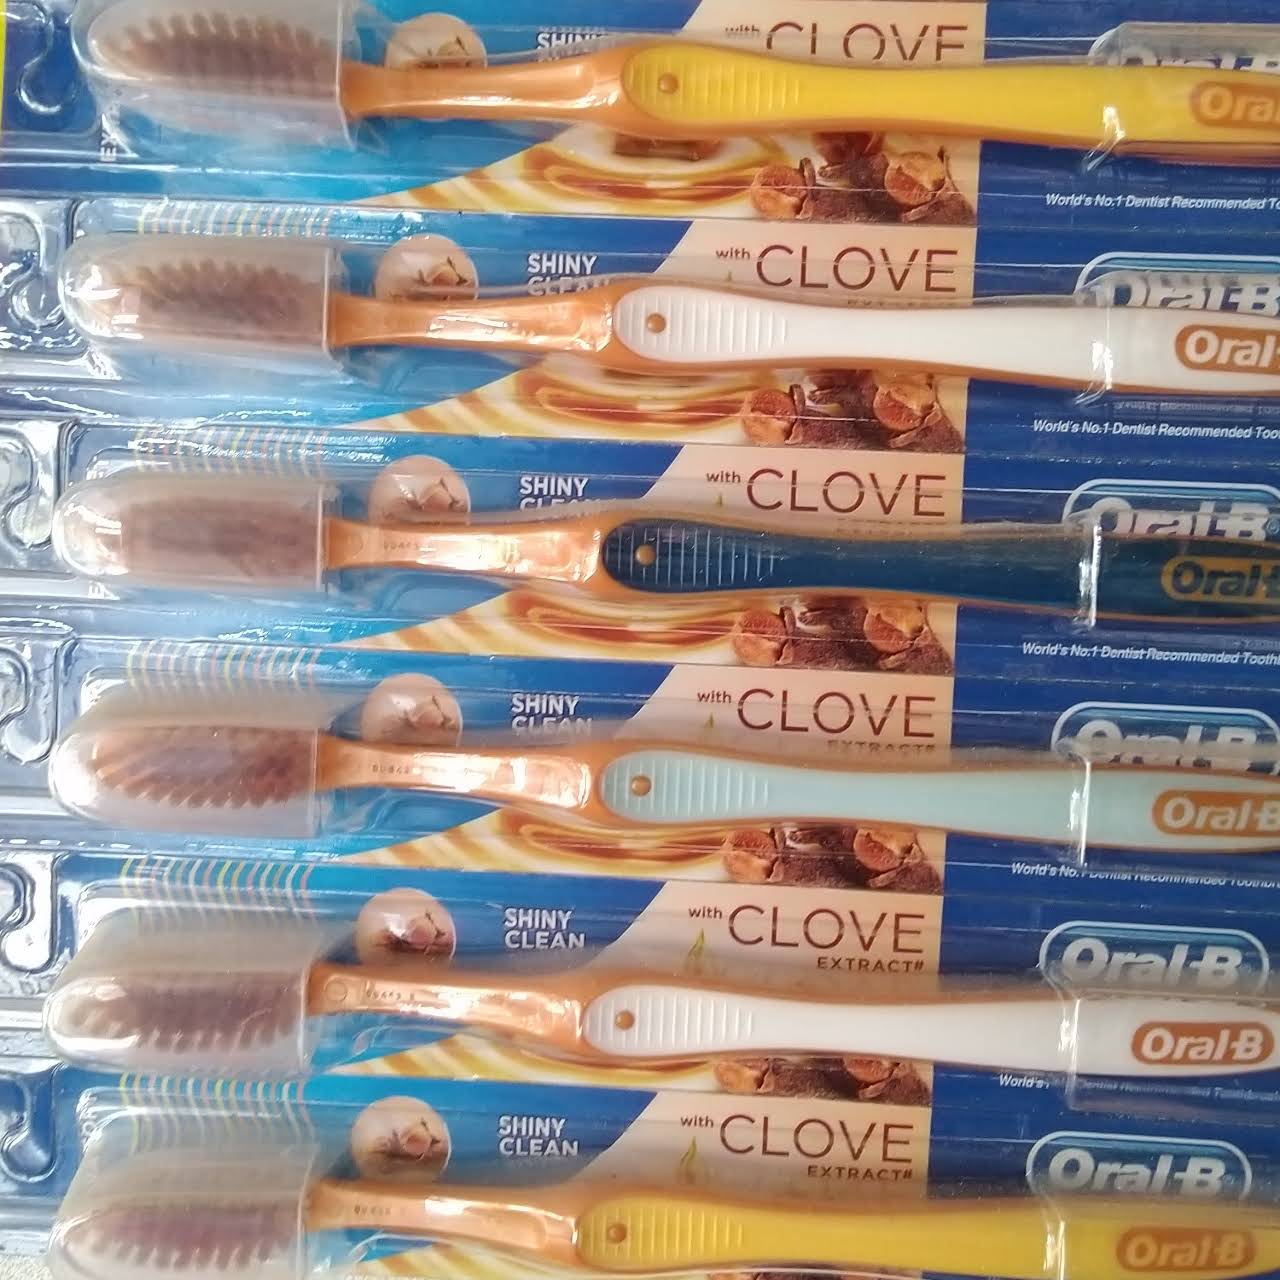 Oral B Clove Extract Shiny Clean Toothbrush 1pc.